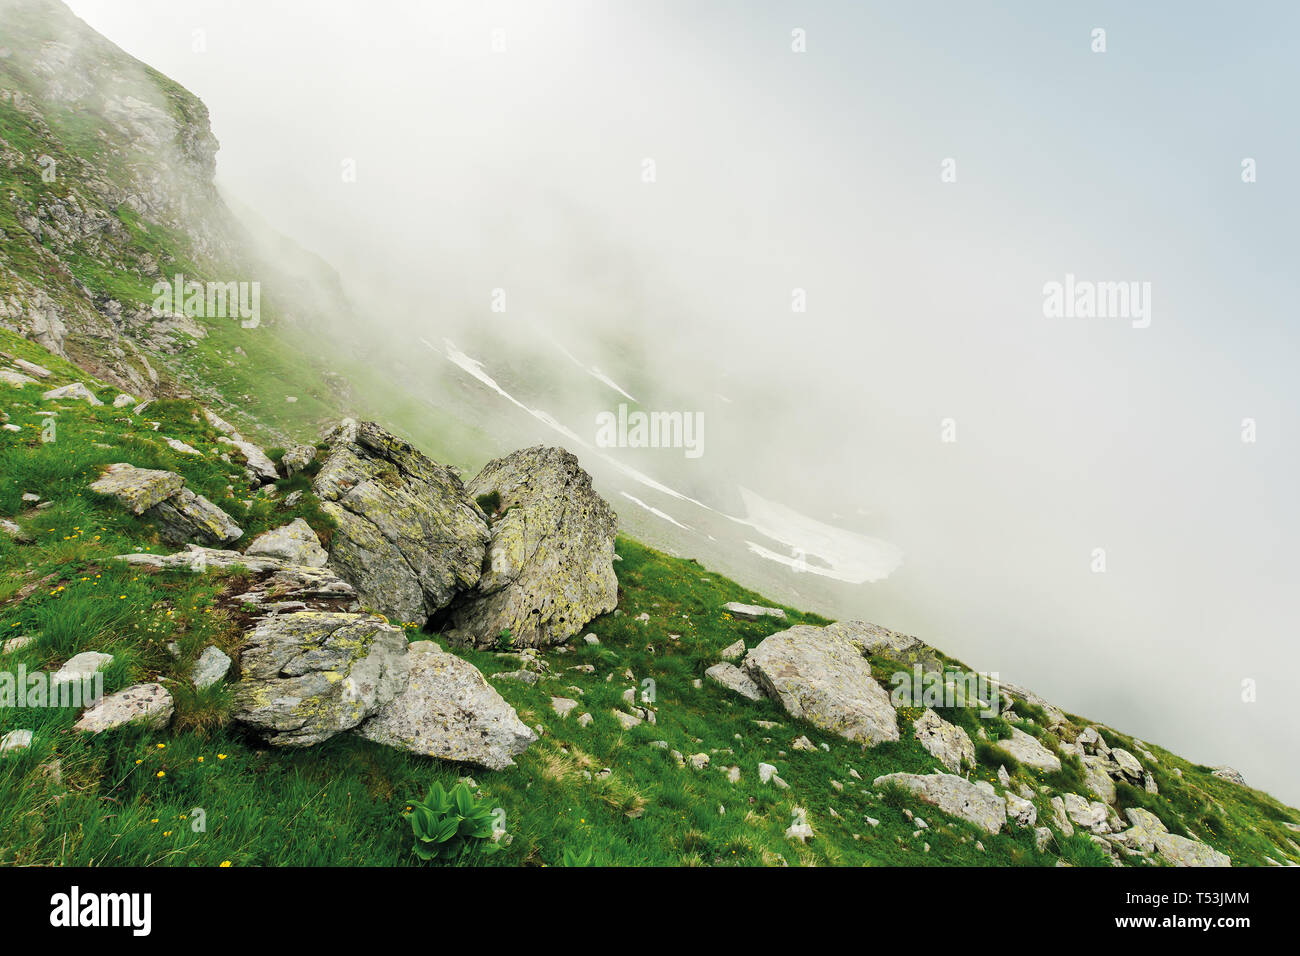 hiking uphill in the fog. huge boulders on a grassy slope. mysterious nature scenery. bad weather condition. extreme tourism concept Stock Photo